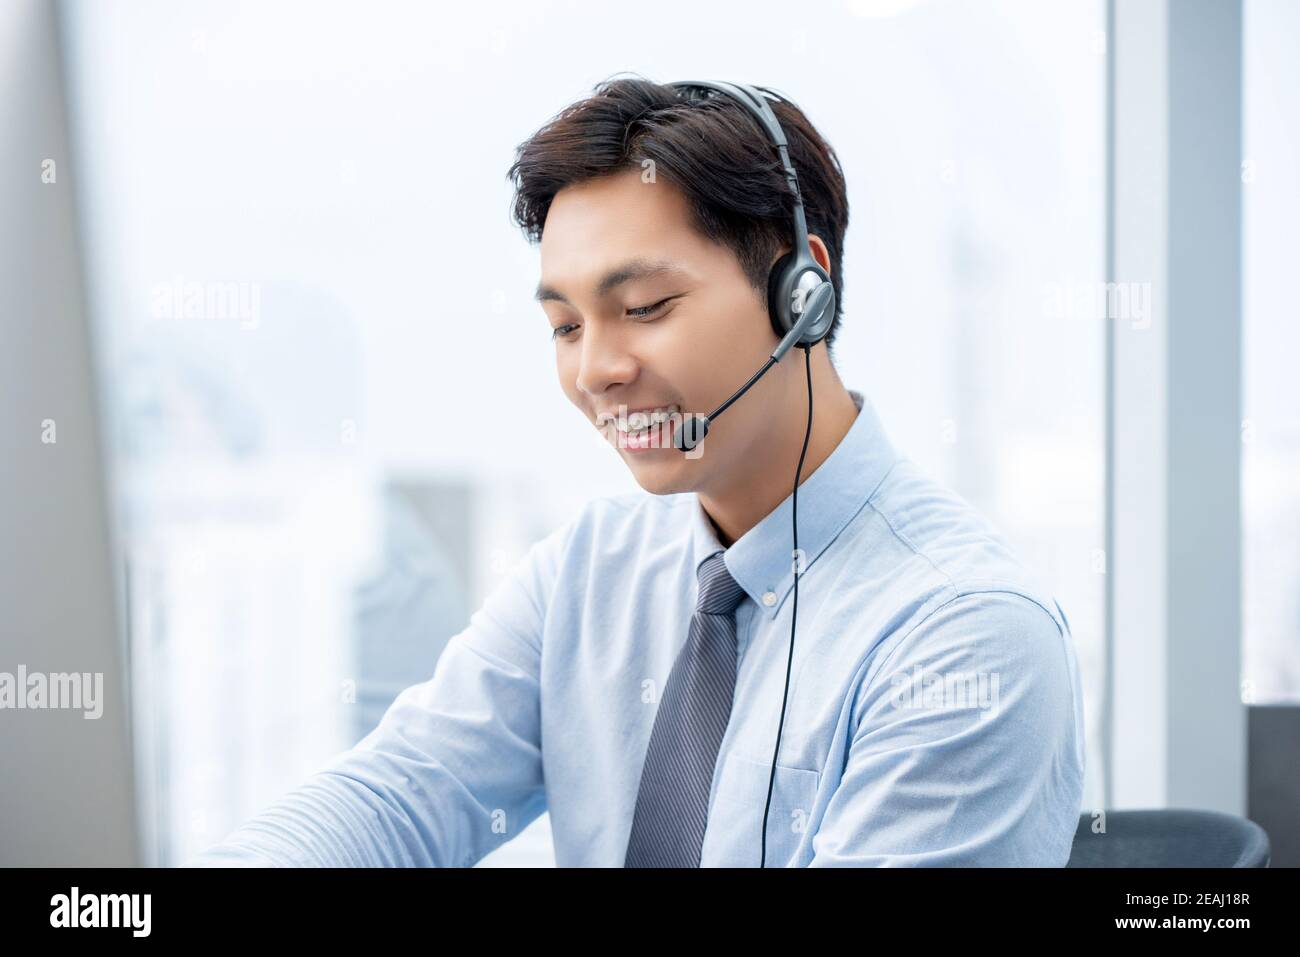 Smiling handsome Asian man working in call center office as a customer service operator Stock Photo